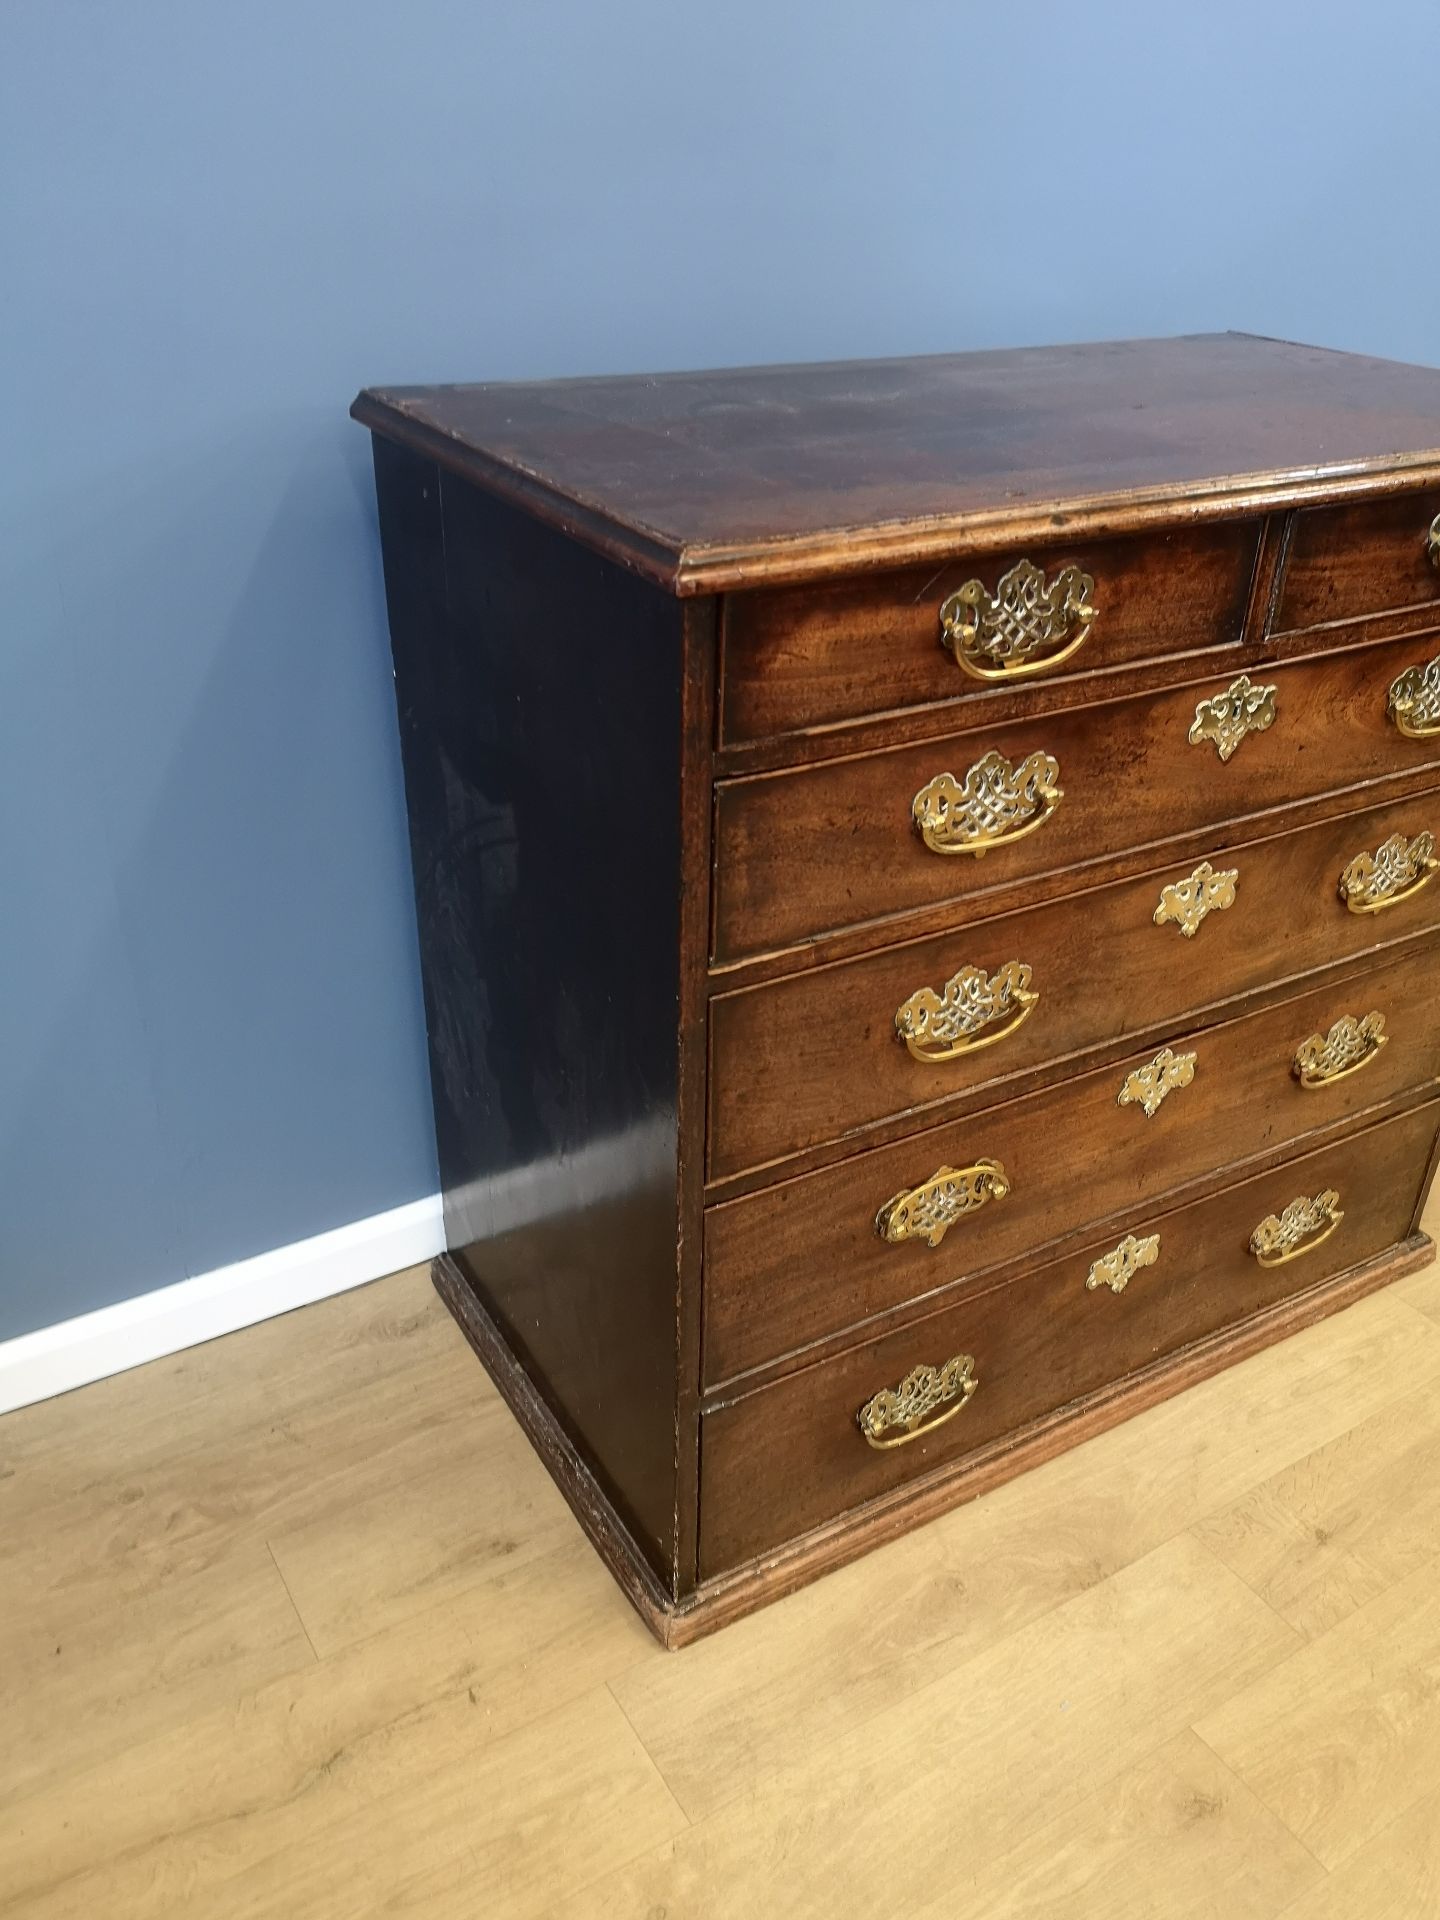 Mahogany chest of drawers - Image 4 of 4